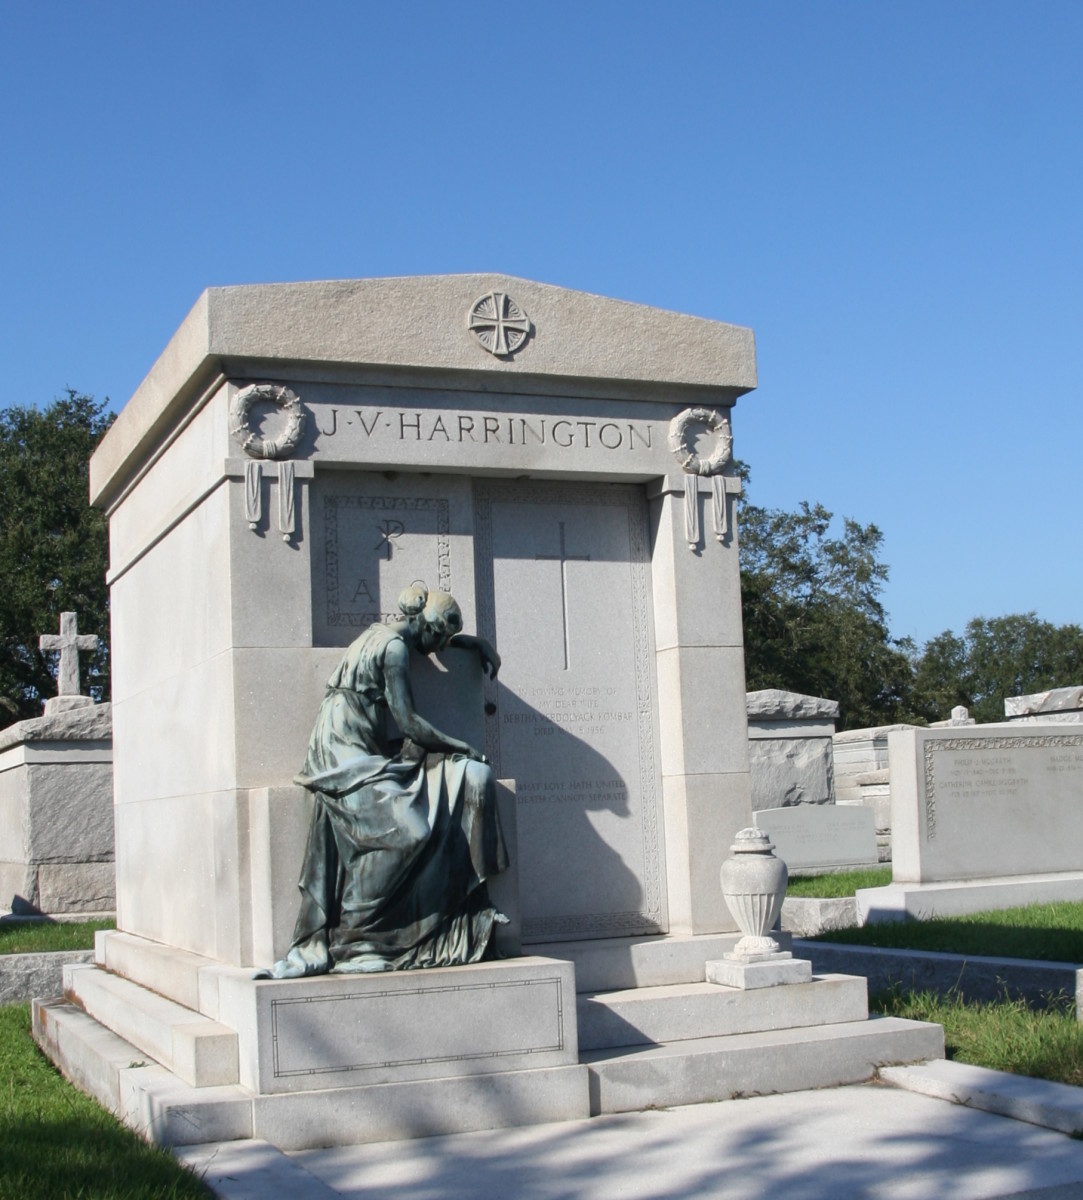 lakelawn-metairie-cemetery-graveyard-to-new-orleans-rich-and-powerful